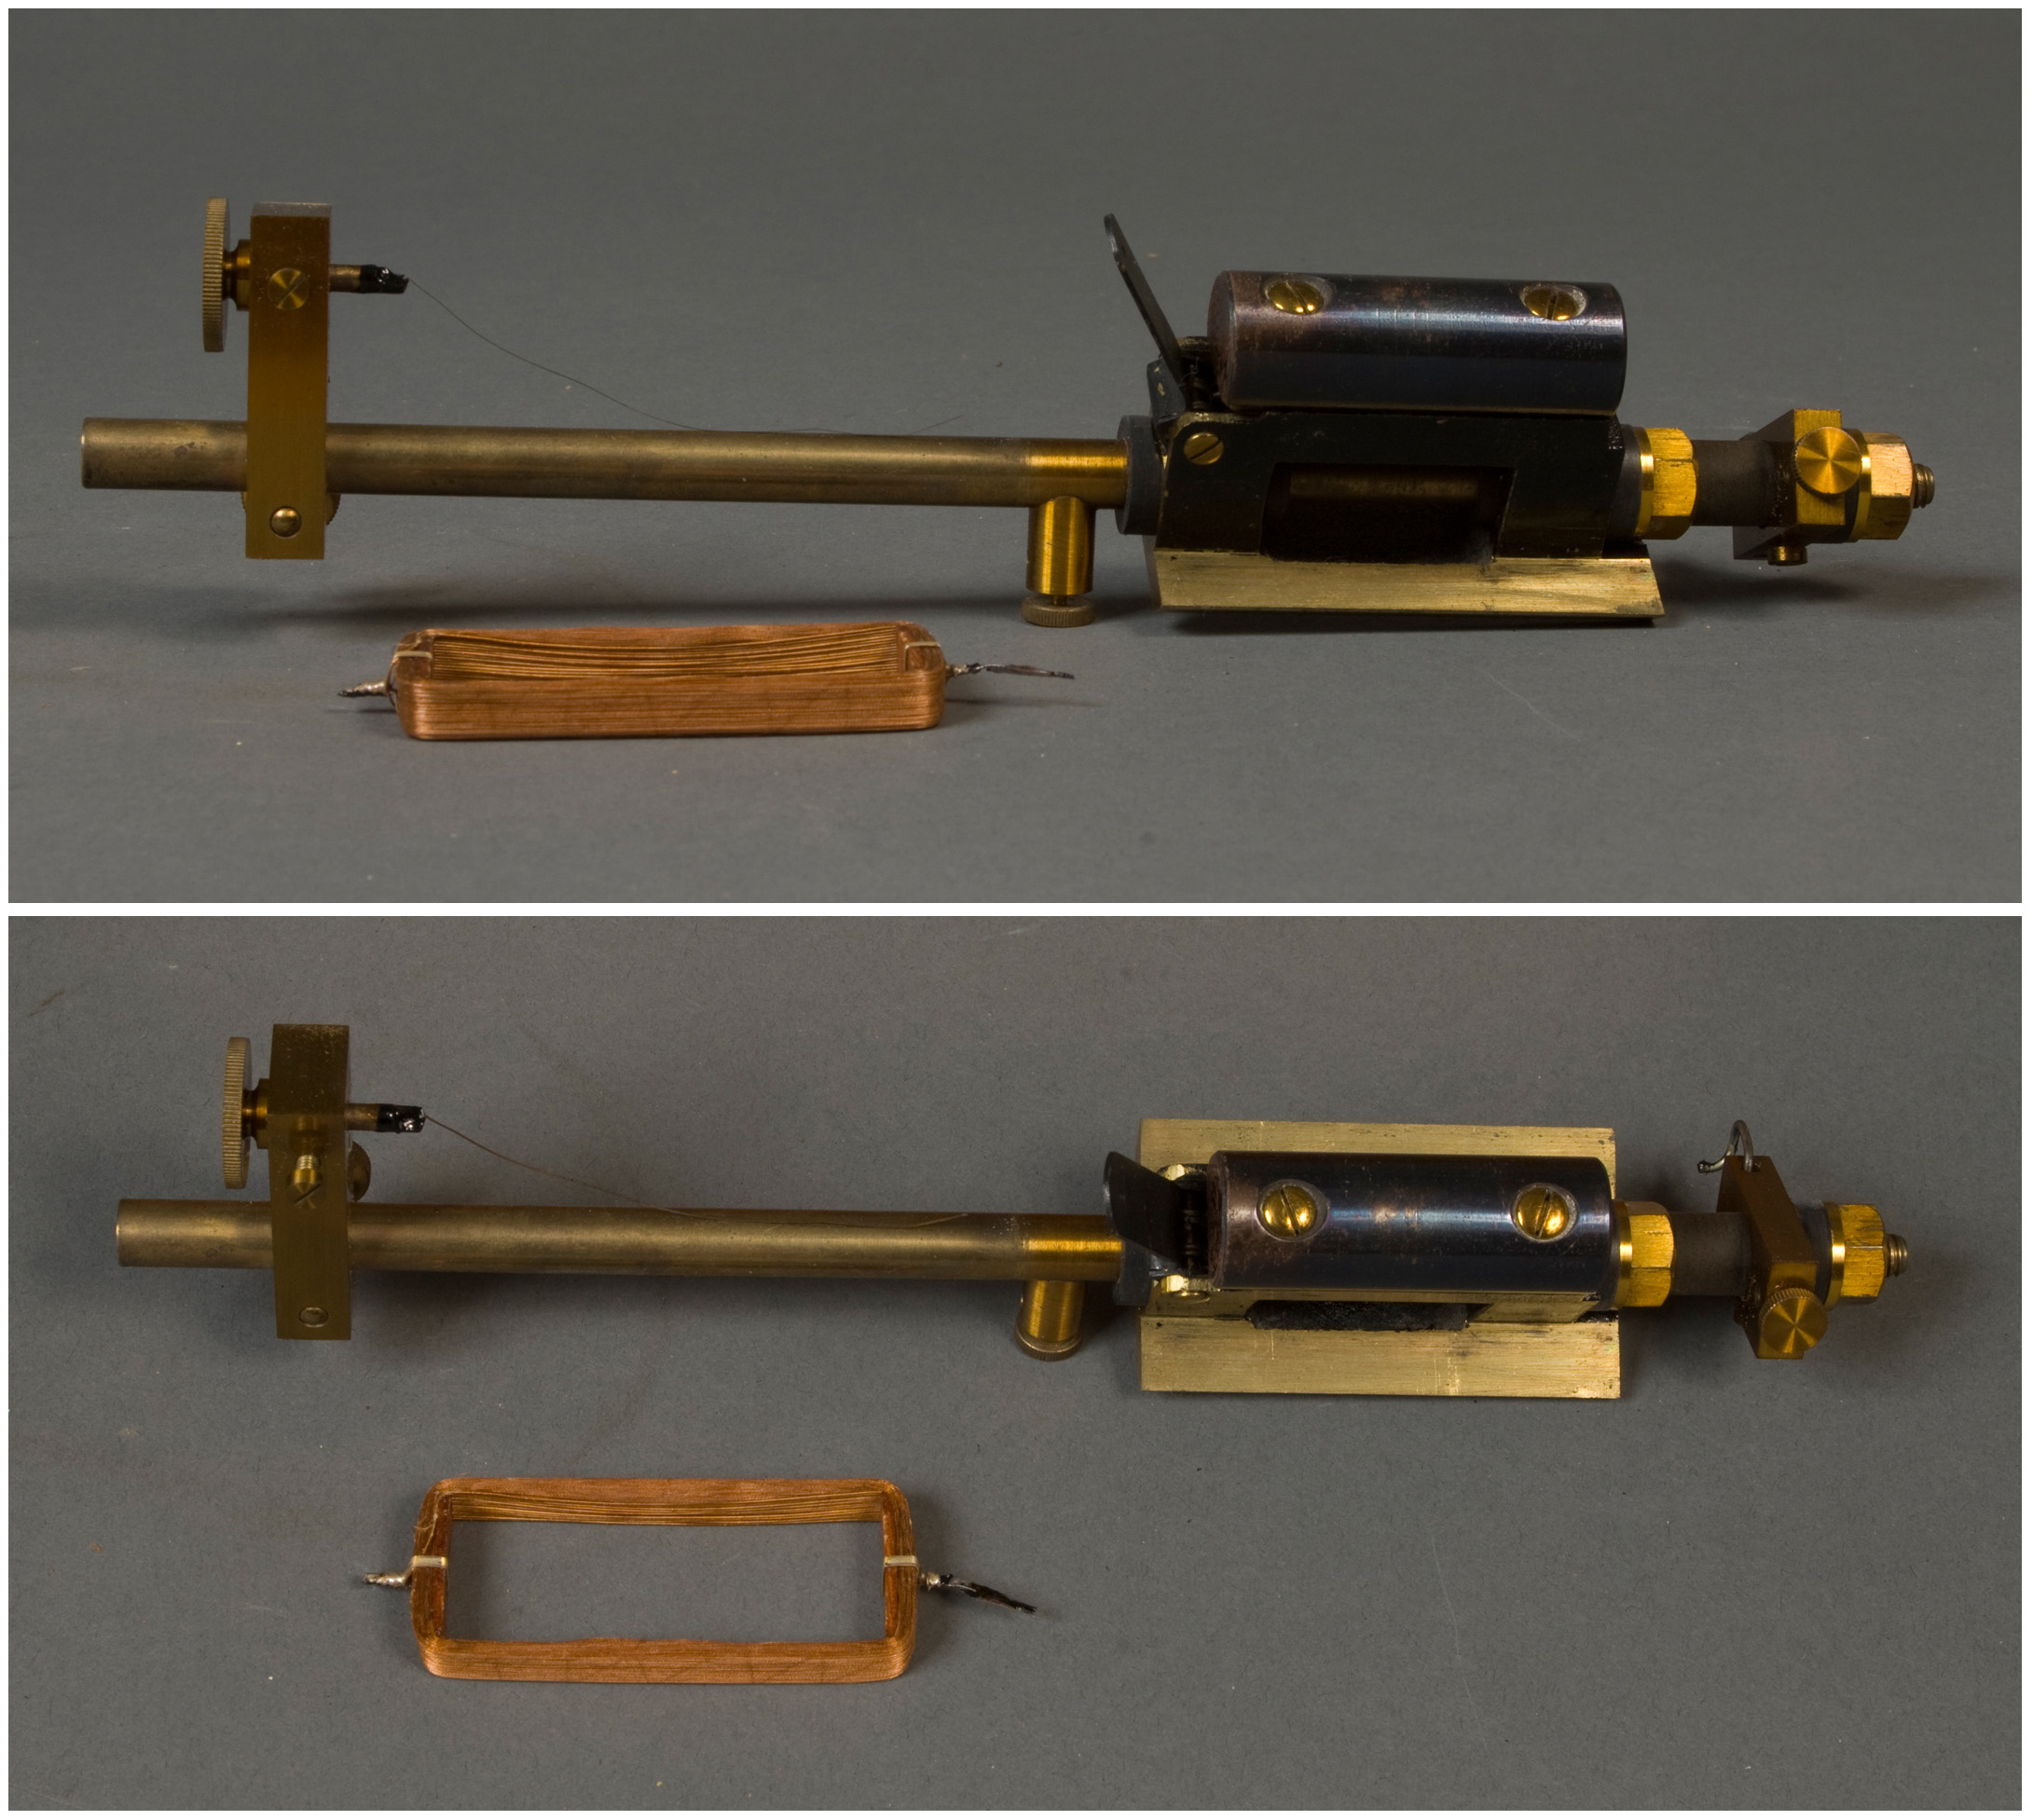 A brass rod with a back box mounted to a brass plate on one end and a thin brass plate stuck perpendicularly to the rod on the other. There is a lever on the black box and an unattached rectangular coil of copper wire resting next to the device. 